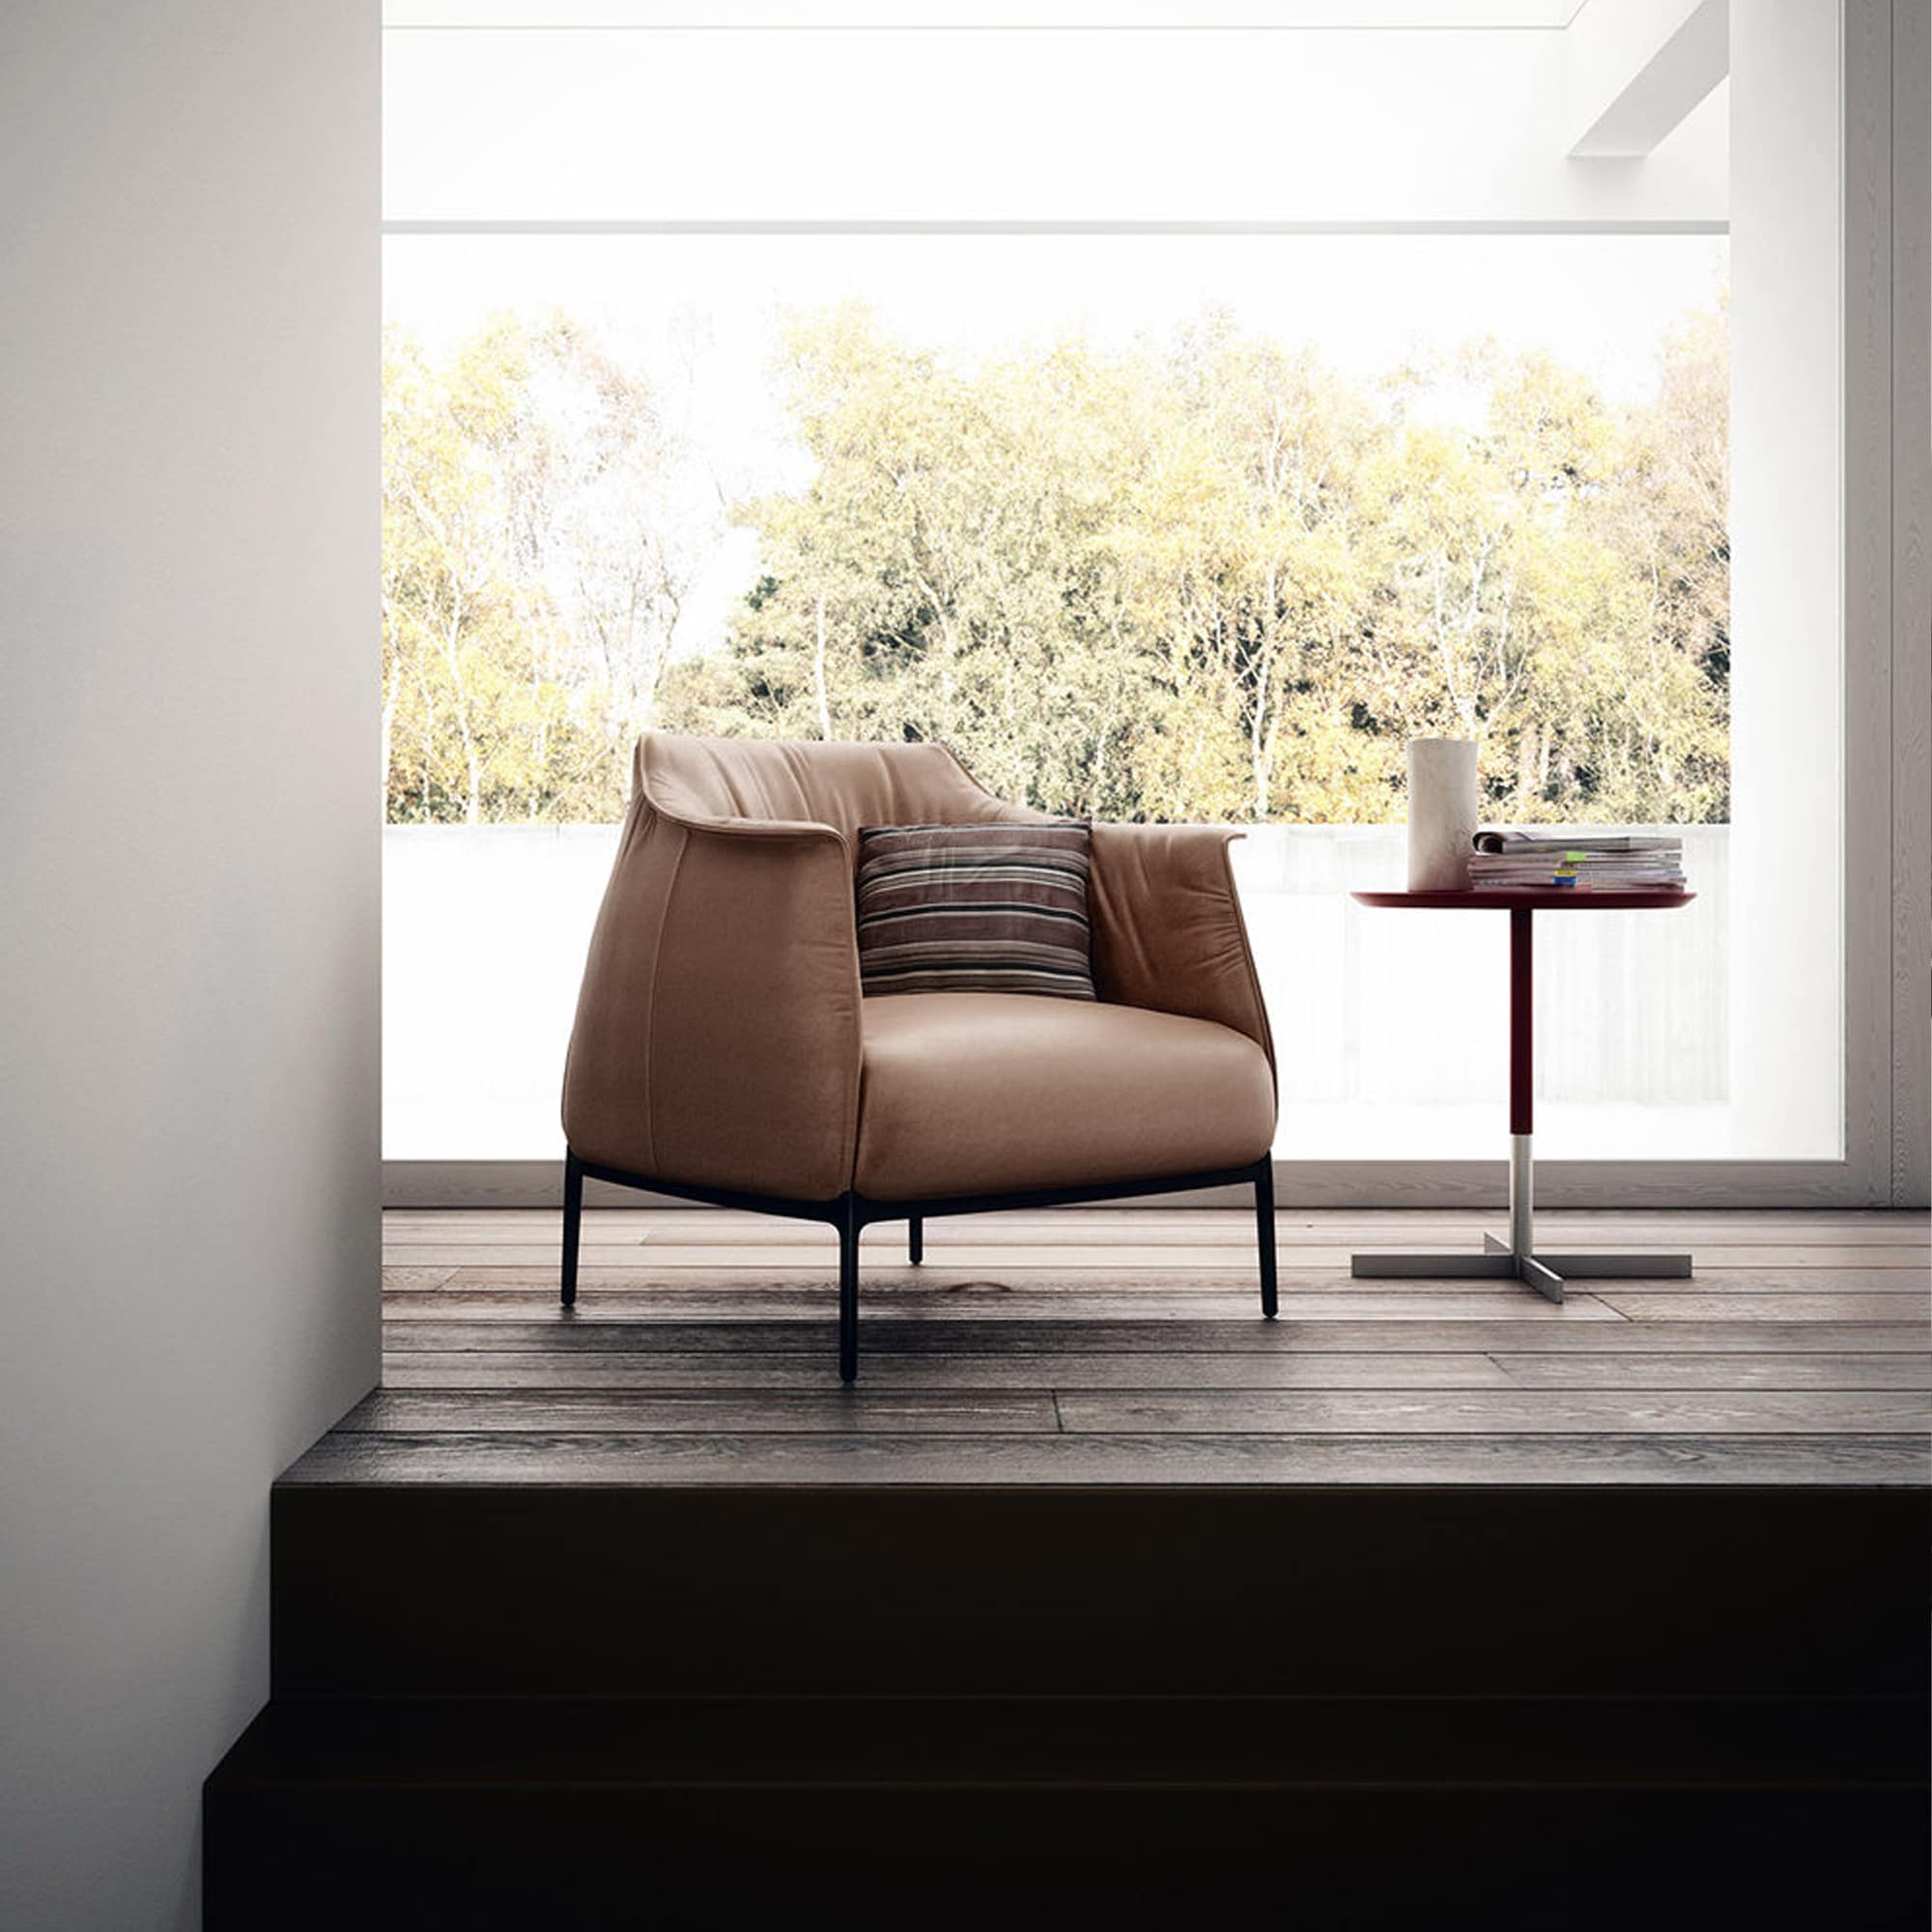 Create a cozy nook with the Archibald Armchair Replica, perfect for relaxing in any open plan or private environment.